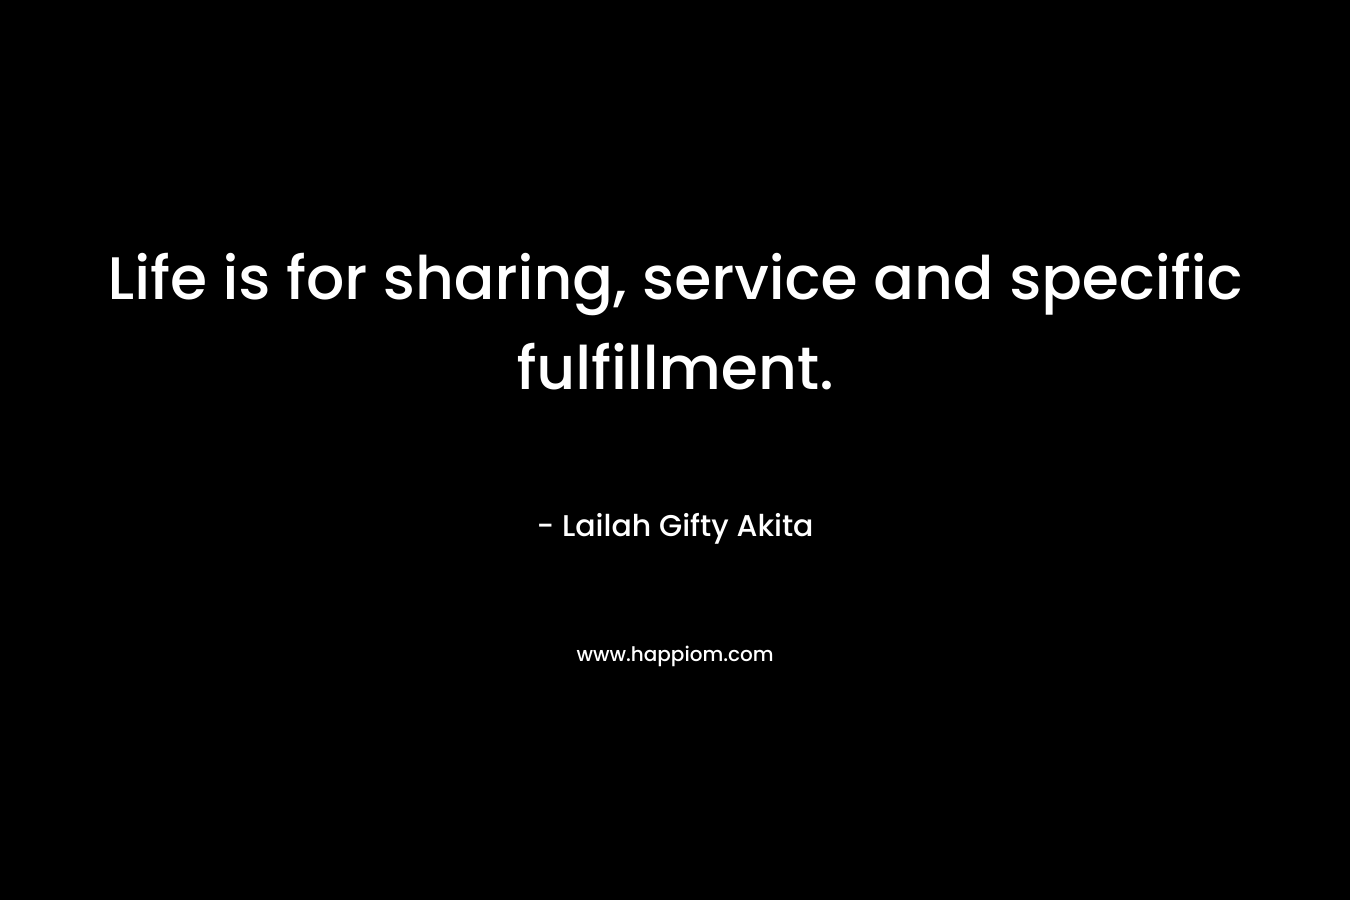 Life is for sharing, service and specific fulfillment.